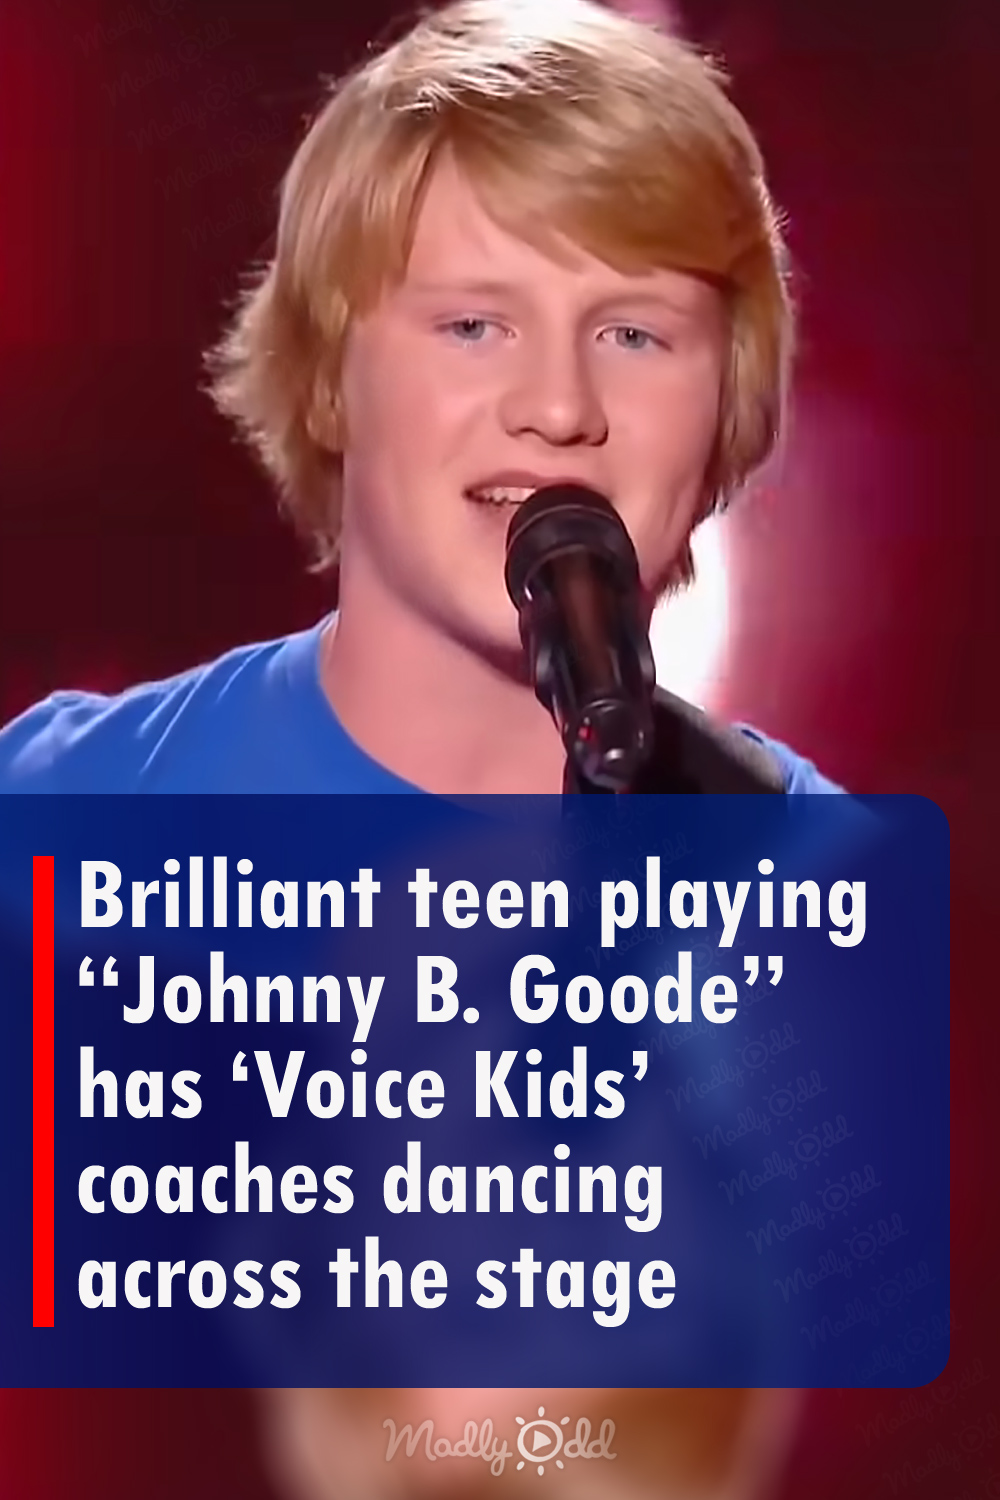 Brilliant teen playing “Johnny B. Goode” has \'Voice Kids\' coaches dancing across the stage